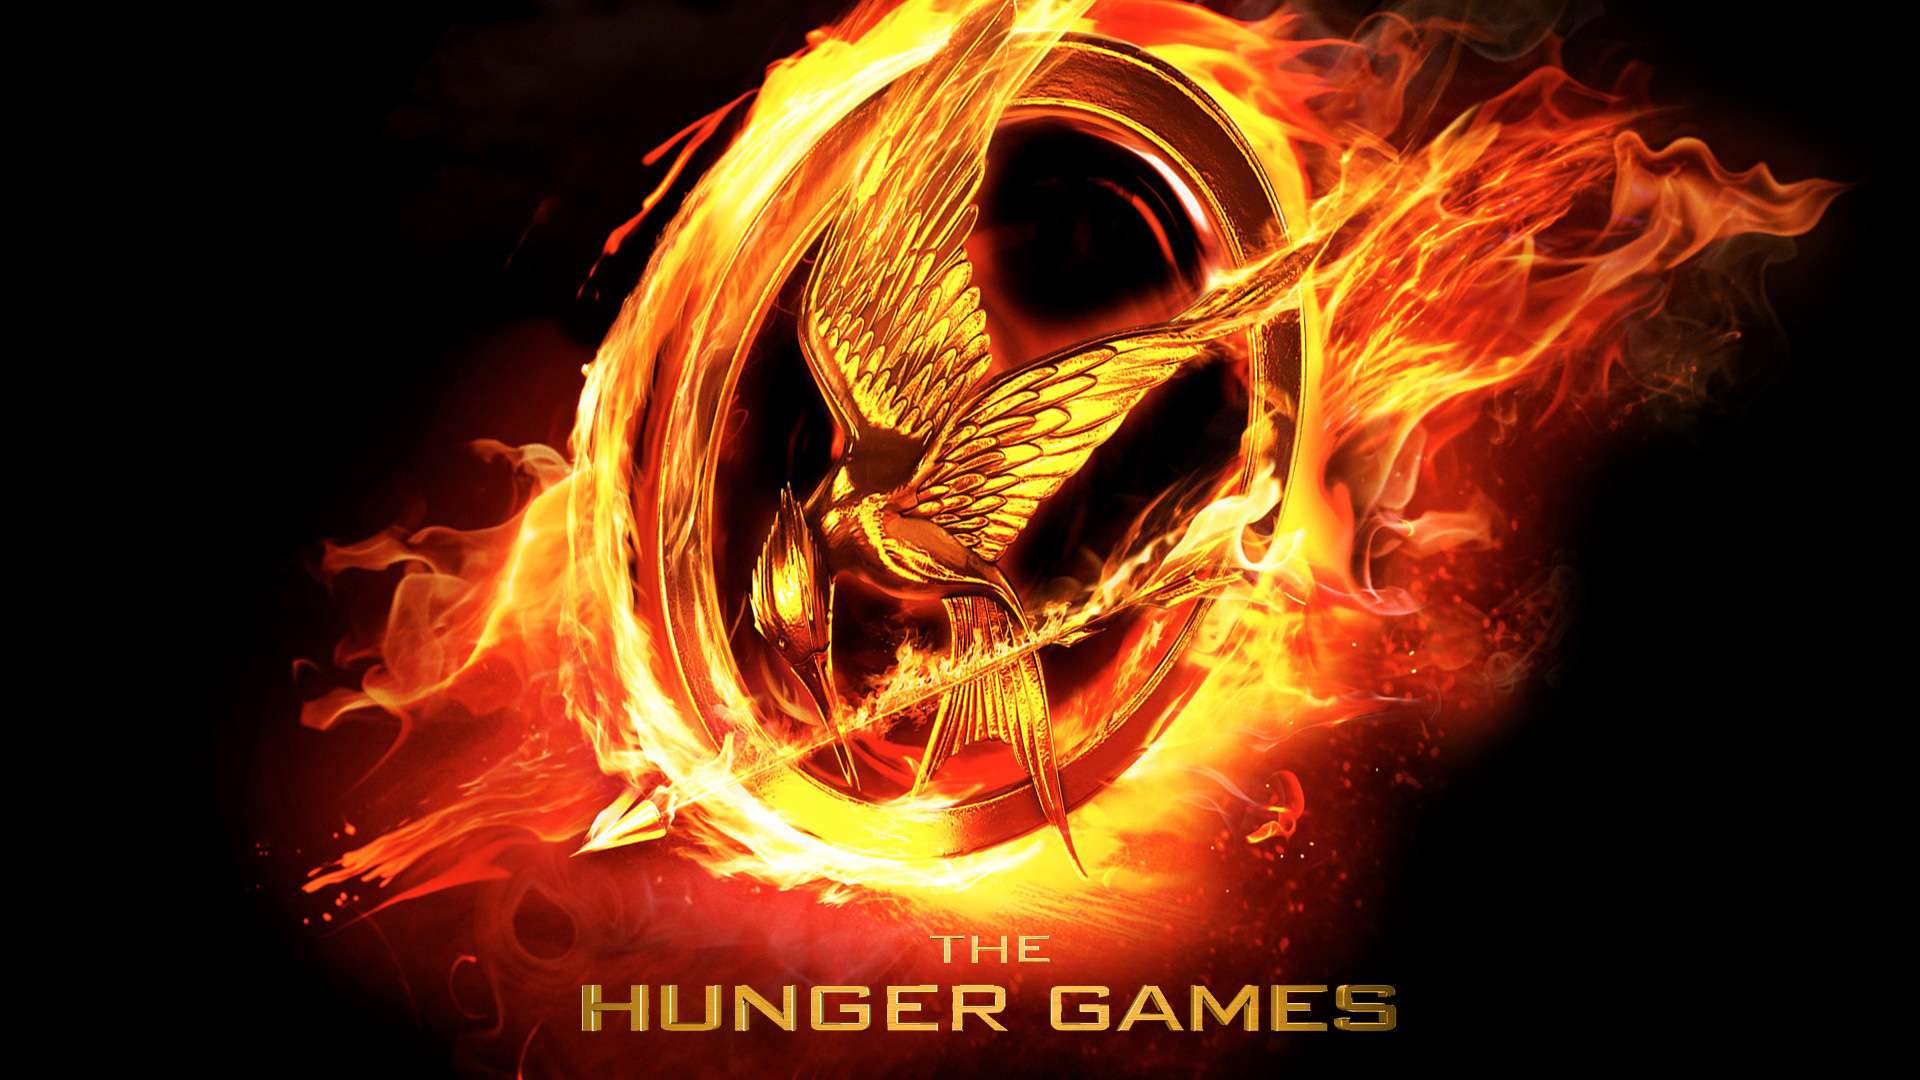 The Hunger Games #1